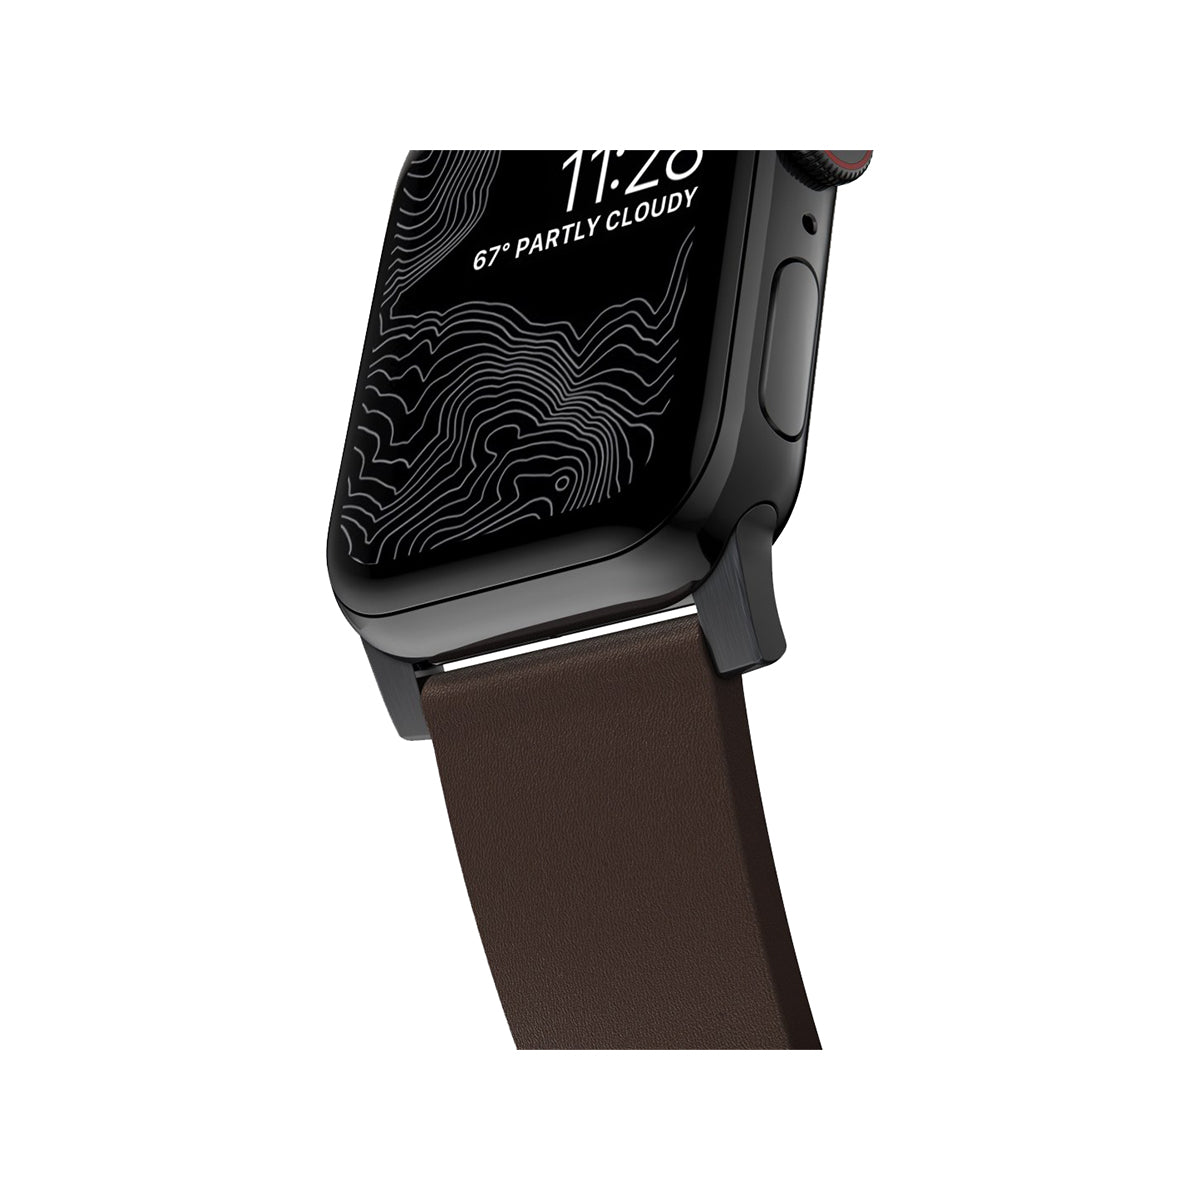 Nomad Active Band Pro 45mm - Black Hard with Brown Leather Strap.